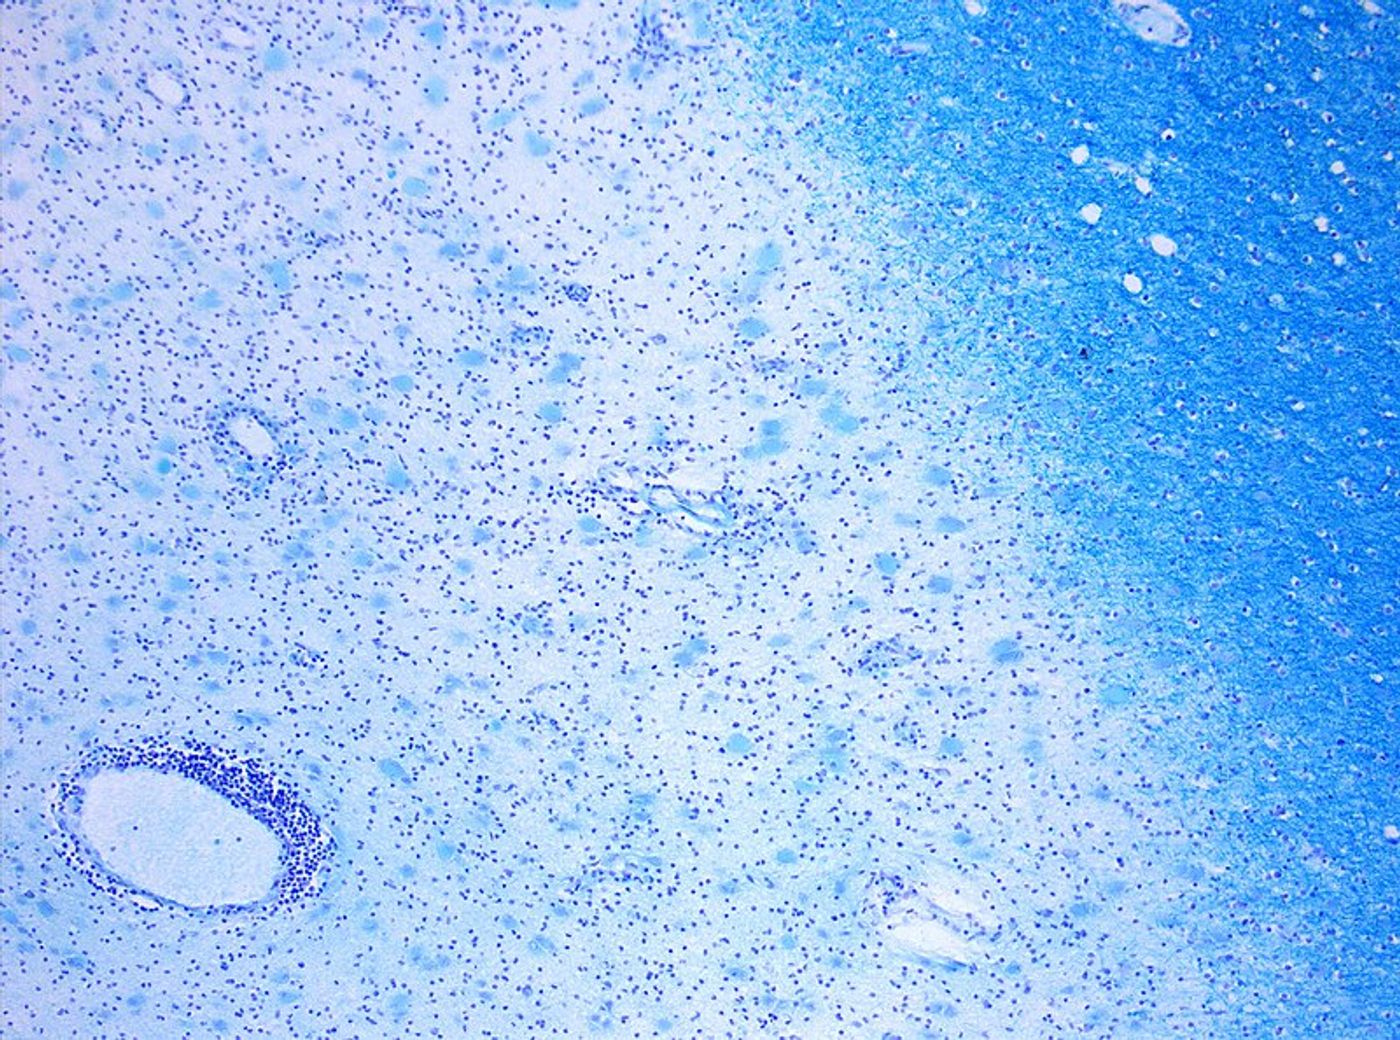 Photomicrograph of a demyelinating MS-Lesion. Credit: Wikimedia user Marvin 101